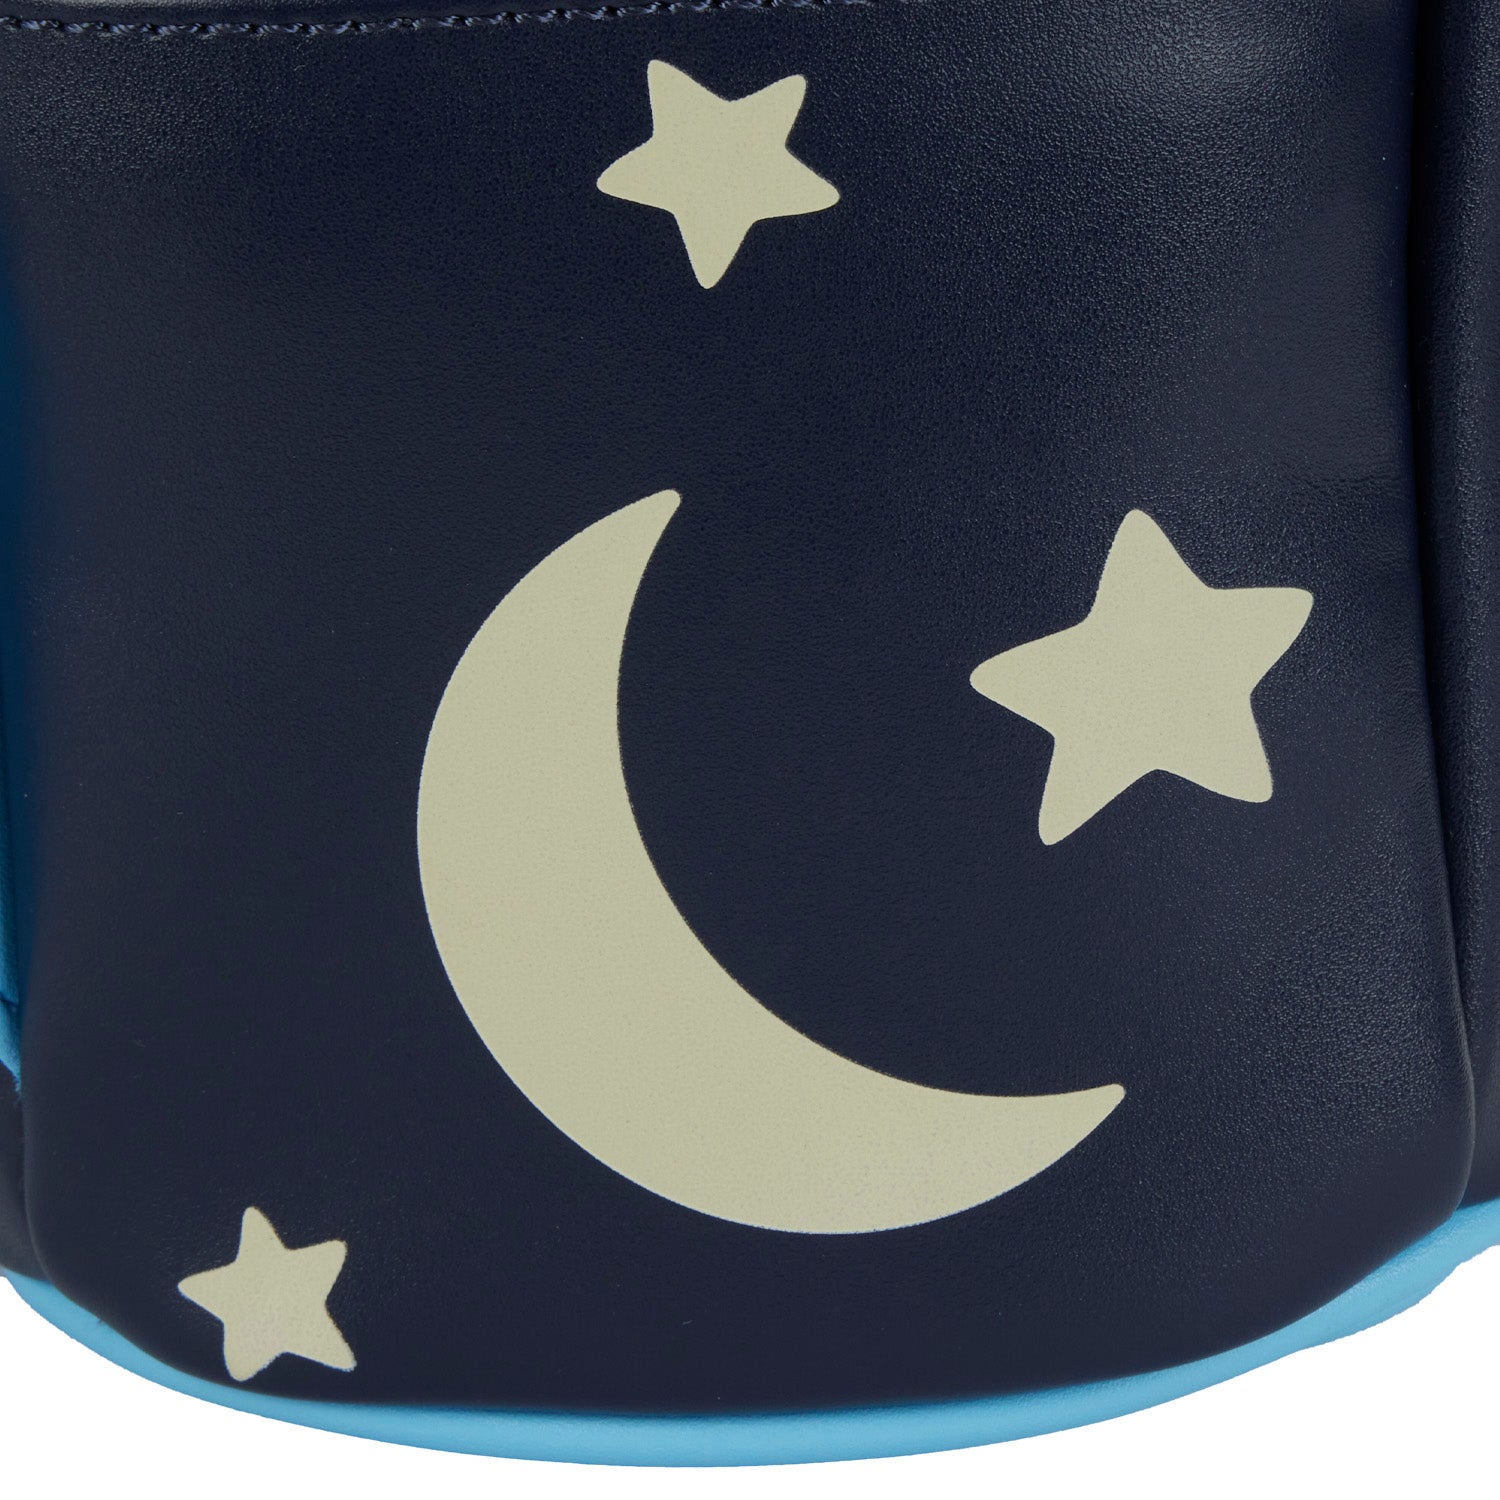 Disney | Lilo and Stitch Glow-In-The-Dark Space Adventure Mini Backpack